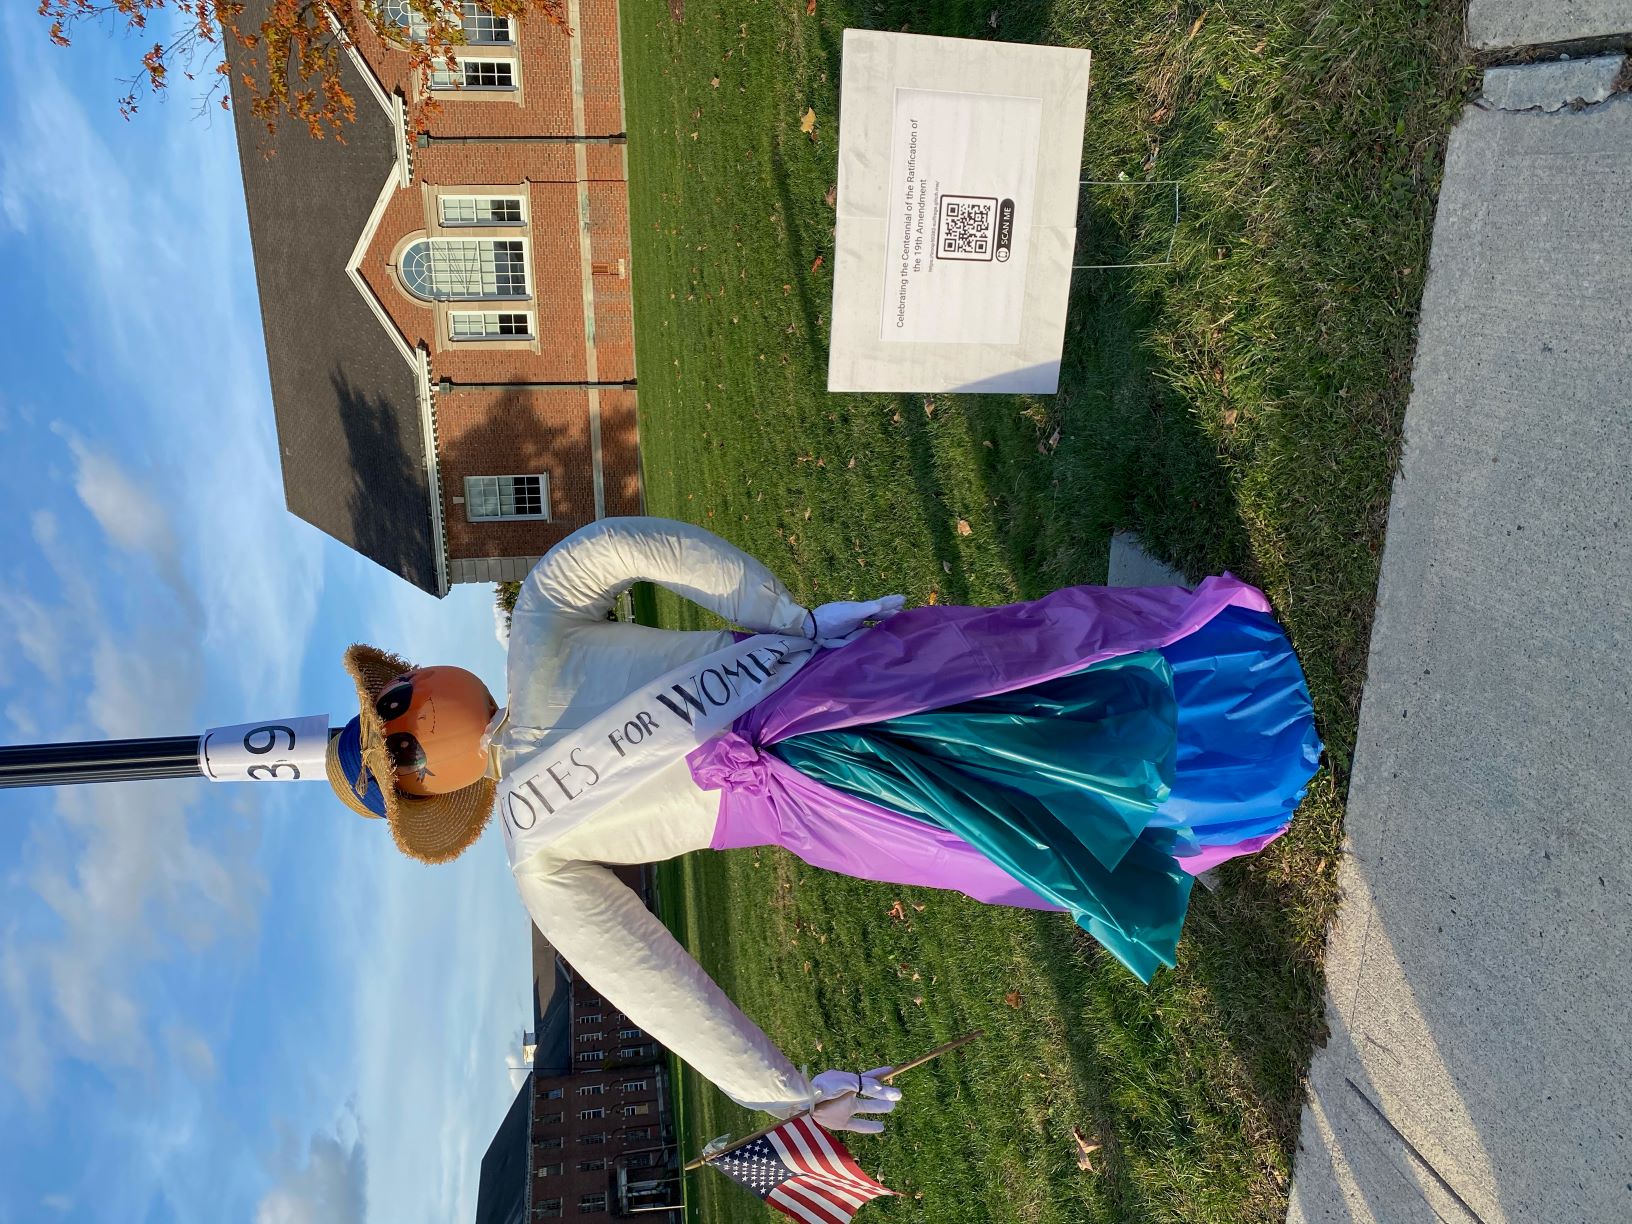 suffragette scarecrow wearing a big hat, white button down shirt, long skirt, and sash that says 'Votes for Women'